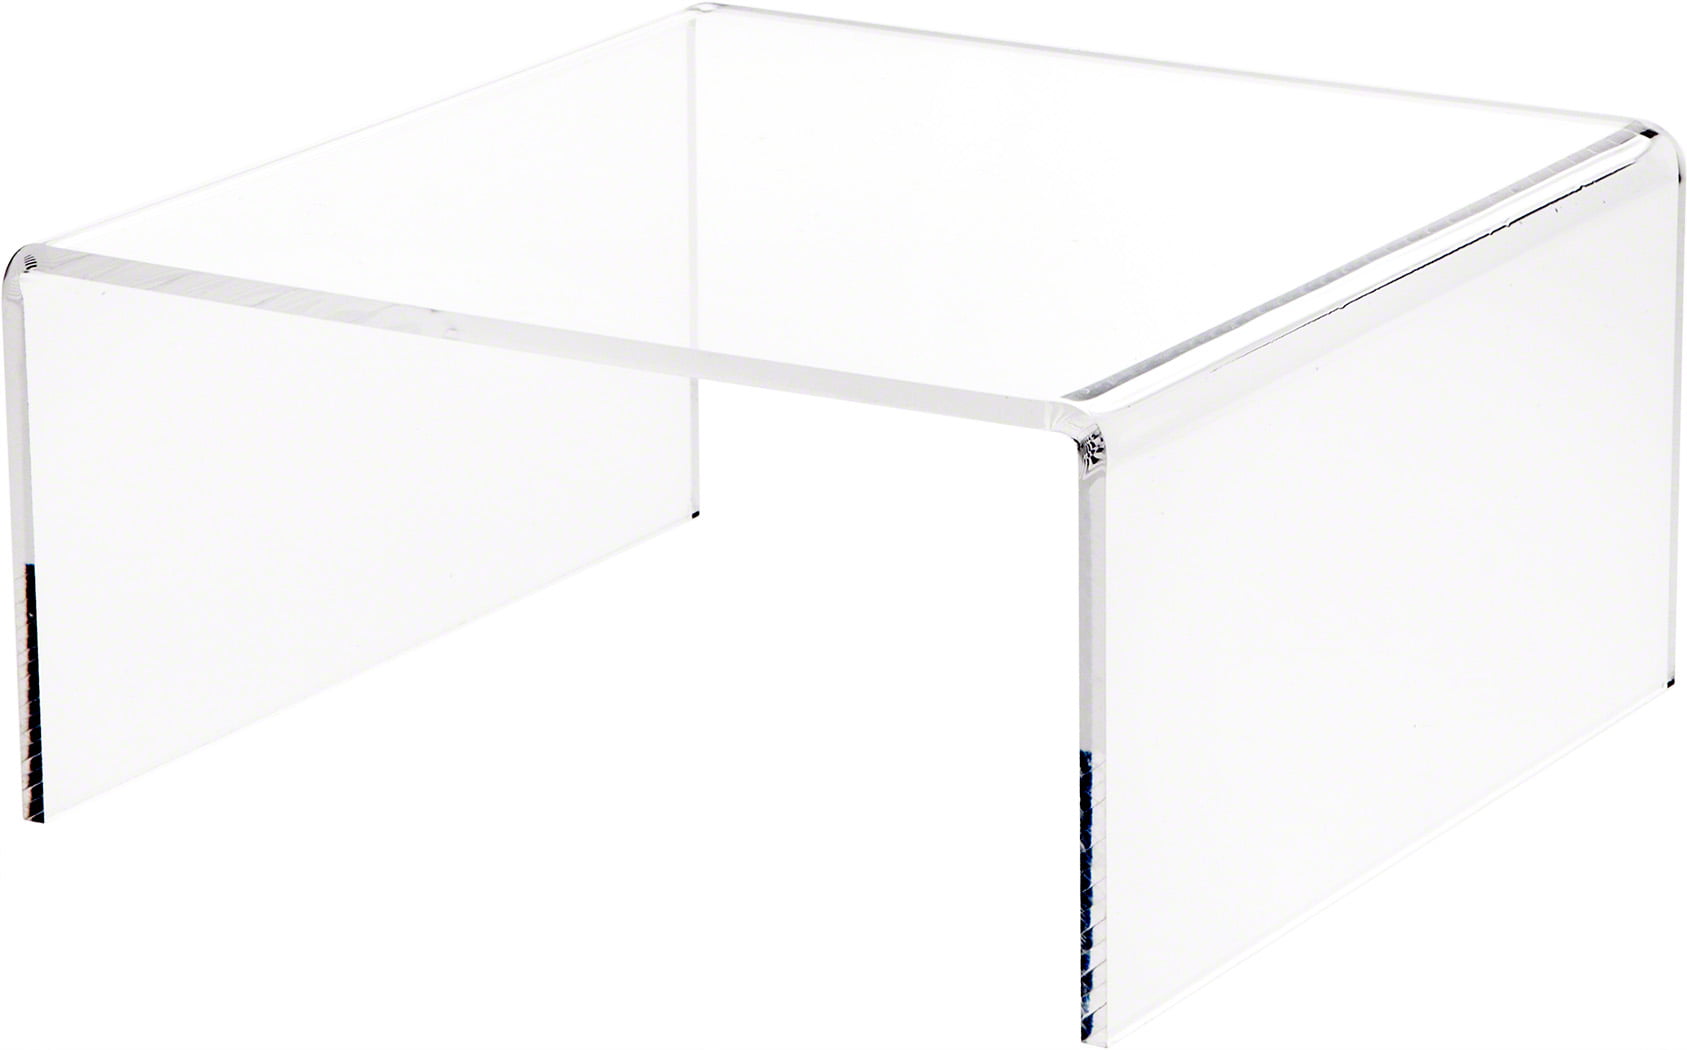 Acrylic Clear Square Riser Display Stand 2 x 2 x 2" 